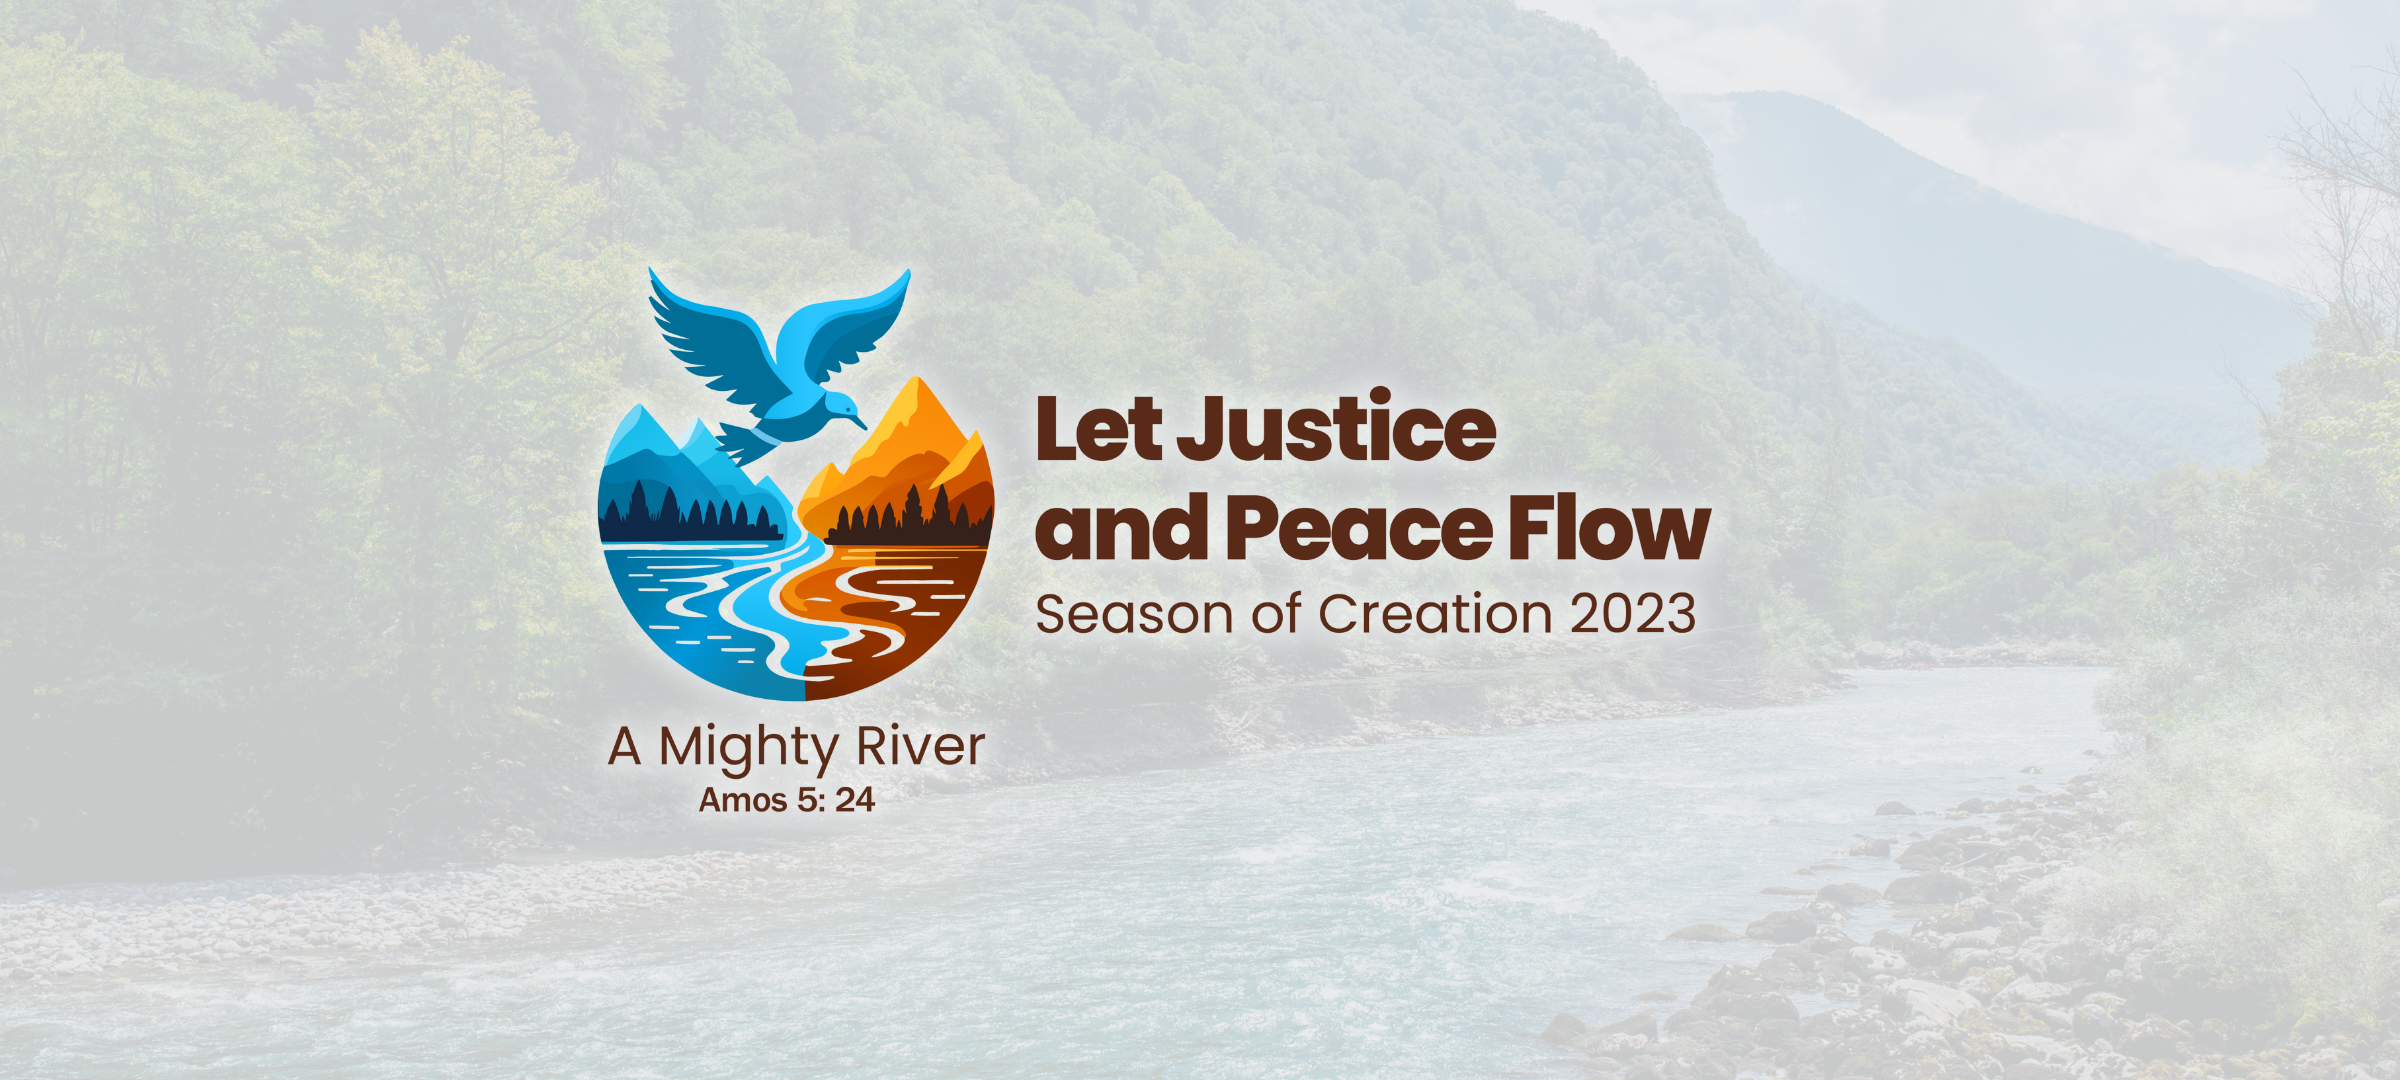 Season of Creation 2023: Let Justice and Peace Flow